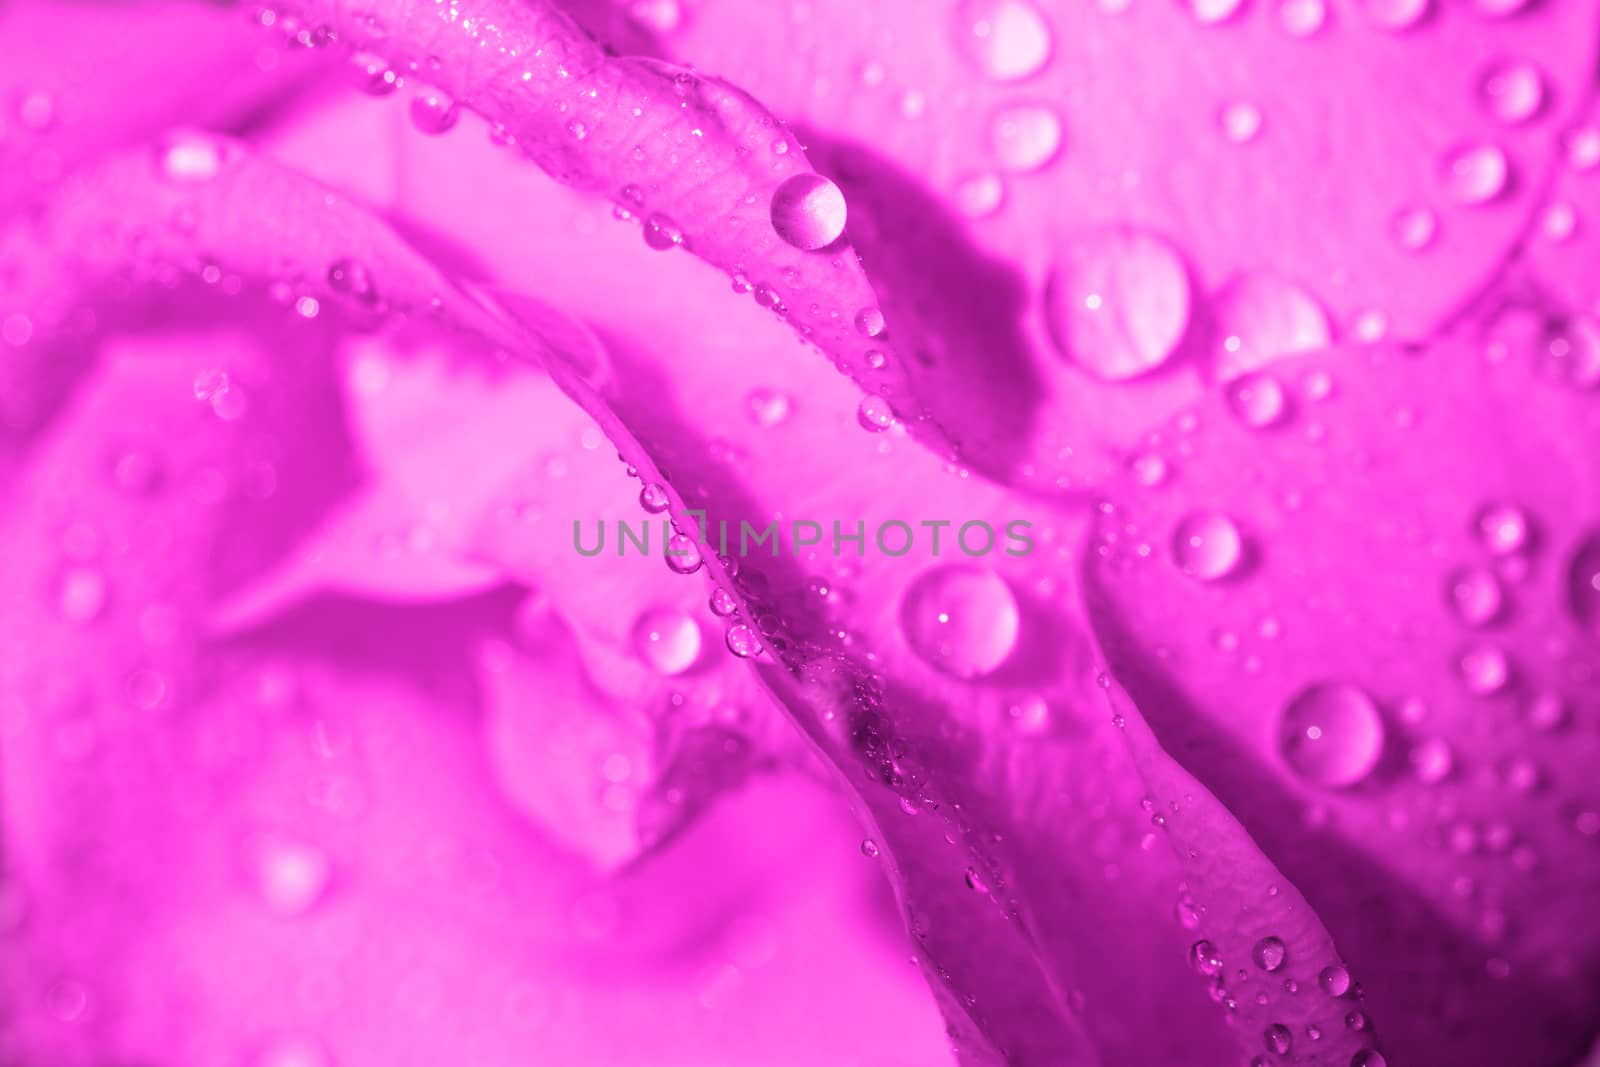 Macro photo of a rose with water droplets